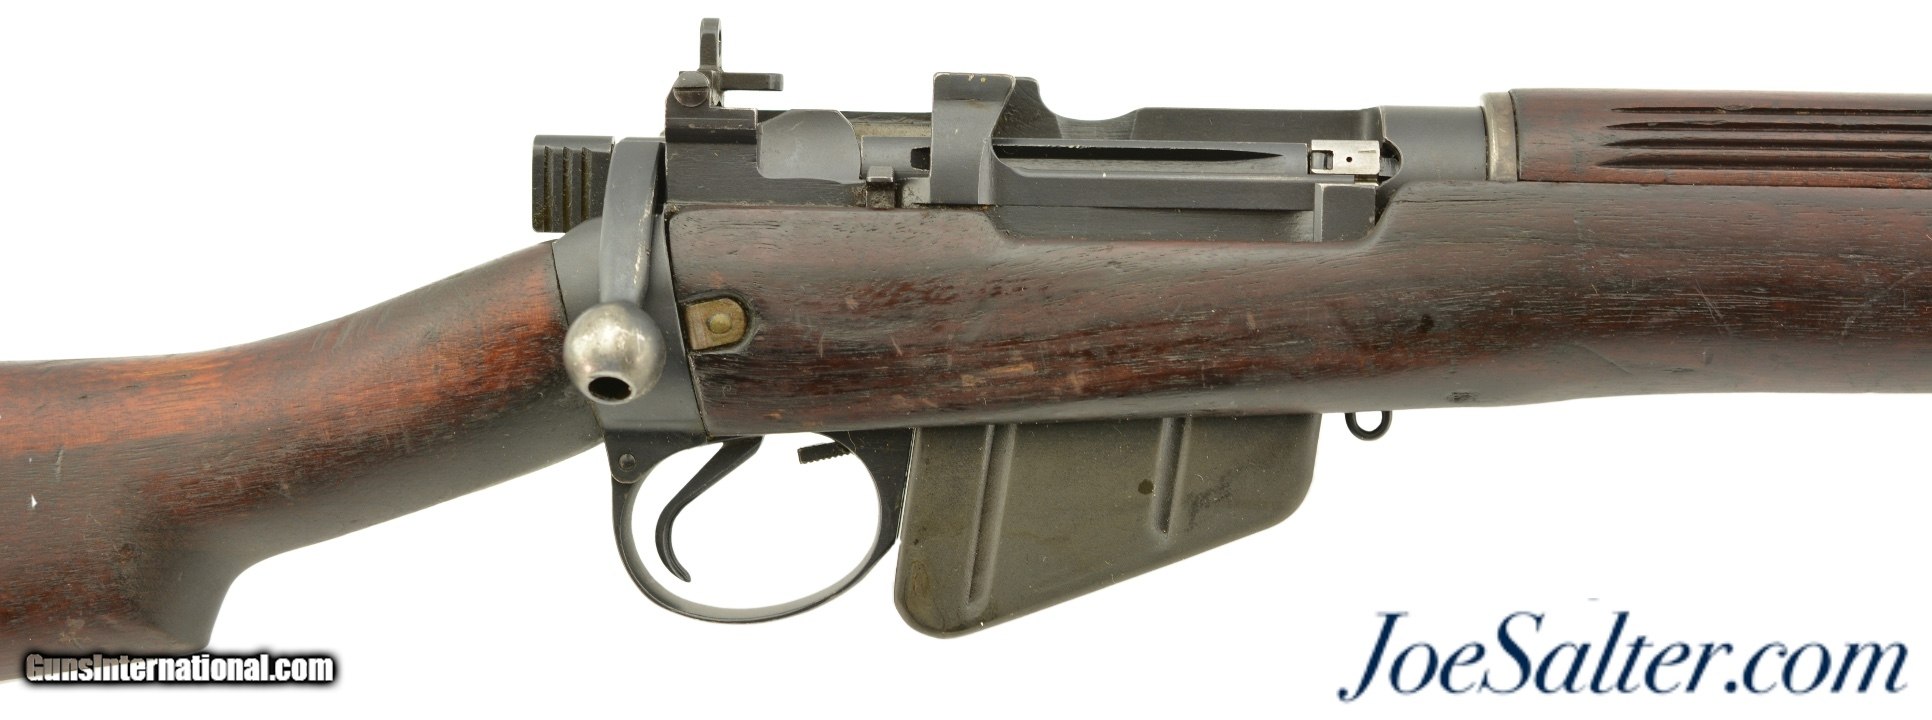 SOLD, EXCEPTIONAL 1942 CANADIAN LONGBRANCH No4 Mk I∗ RIFLE, MINT, MATCHING  & NEW ZEALAND MARKED! - Pre98 Antiques